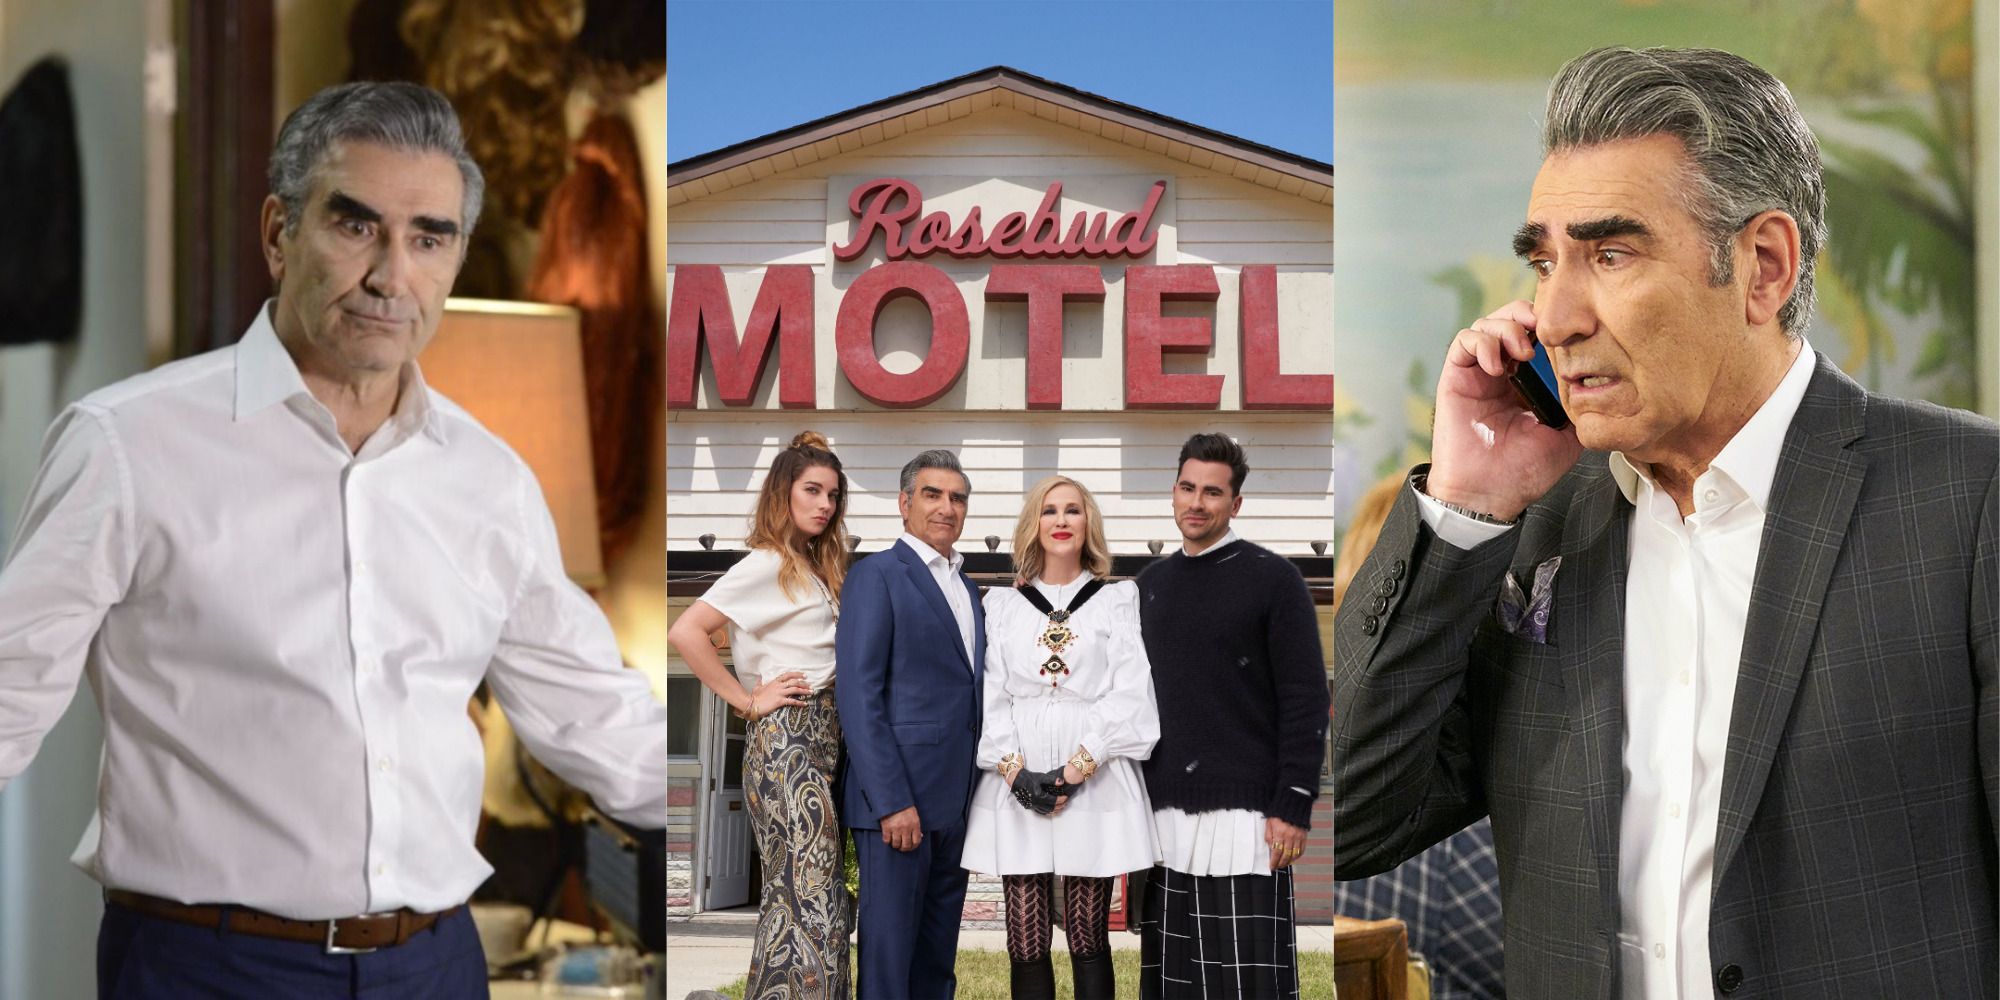 Johnny Rose and Rose family in front of Rosebud Motel Schitt's Creek featured image